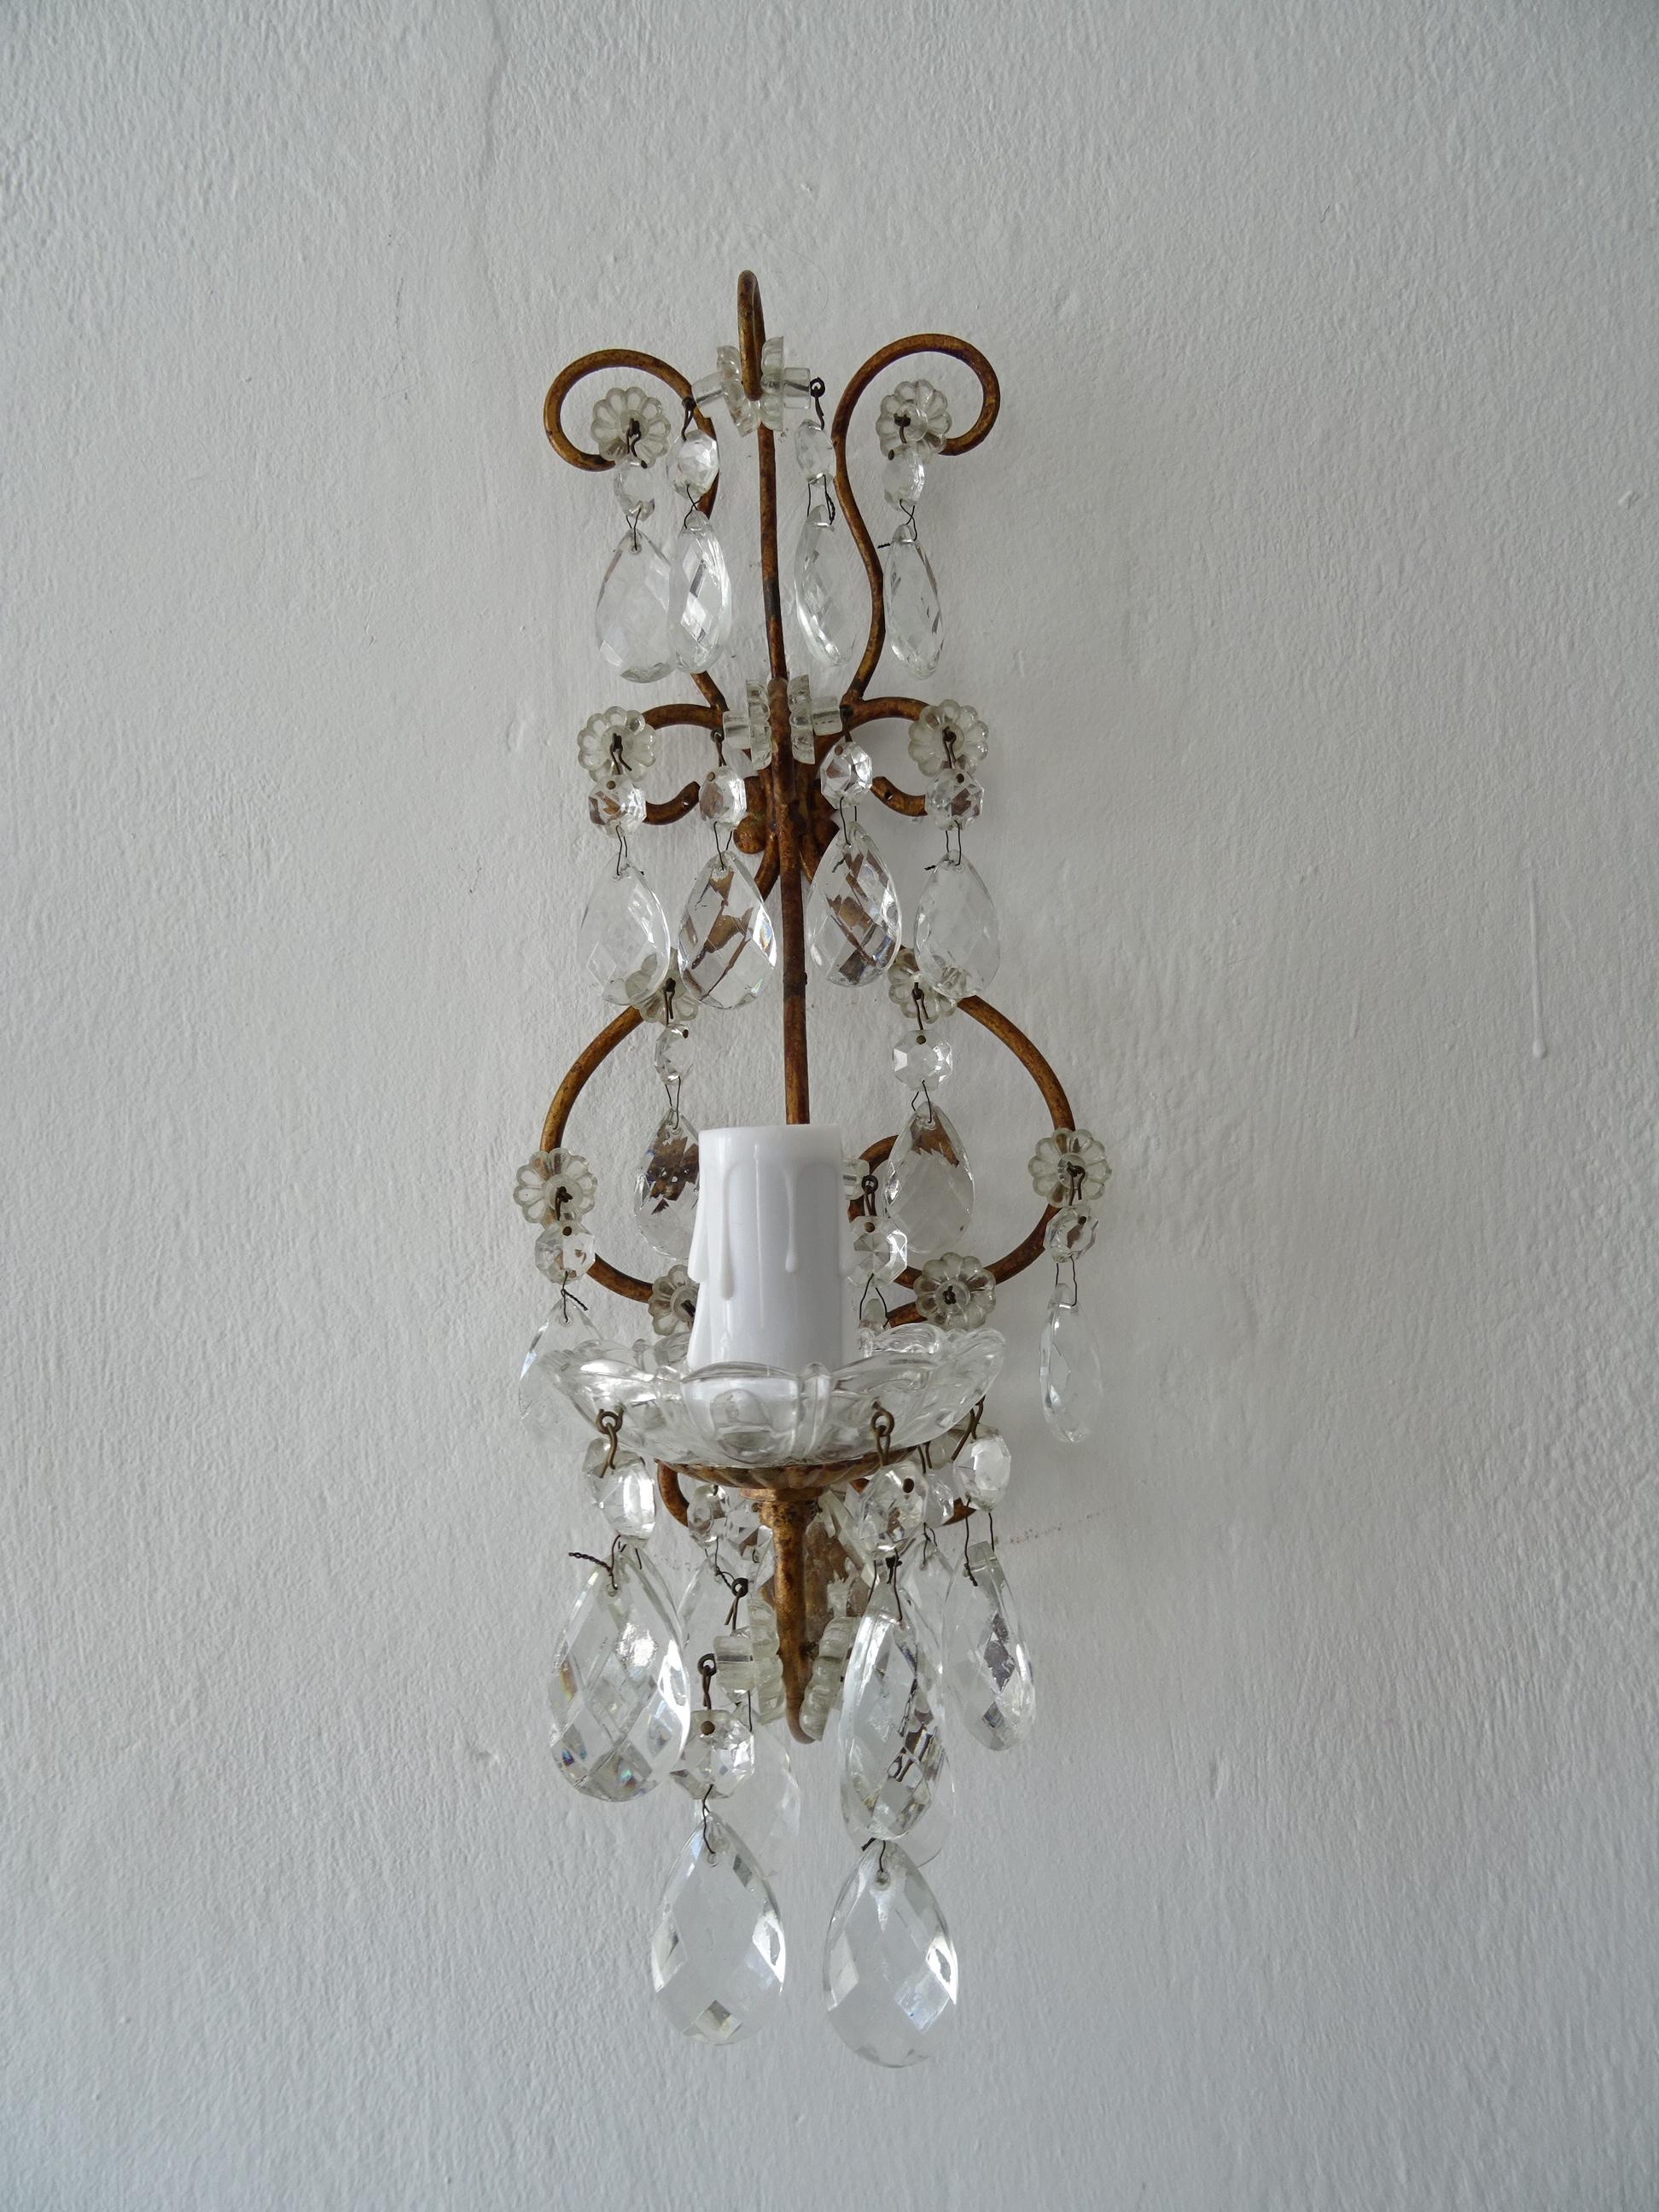 French Loaded Crystal Prisms Sconces, c 1920 For Sale 1